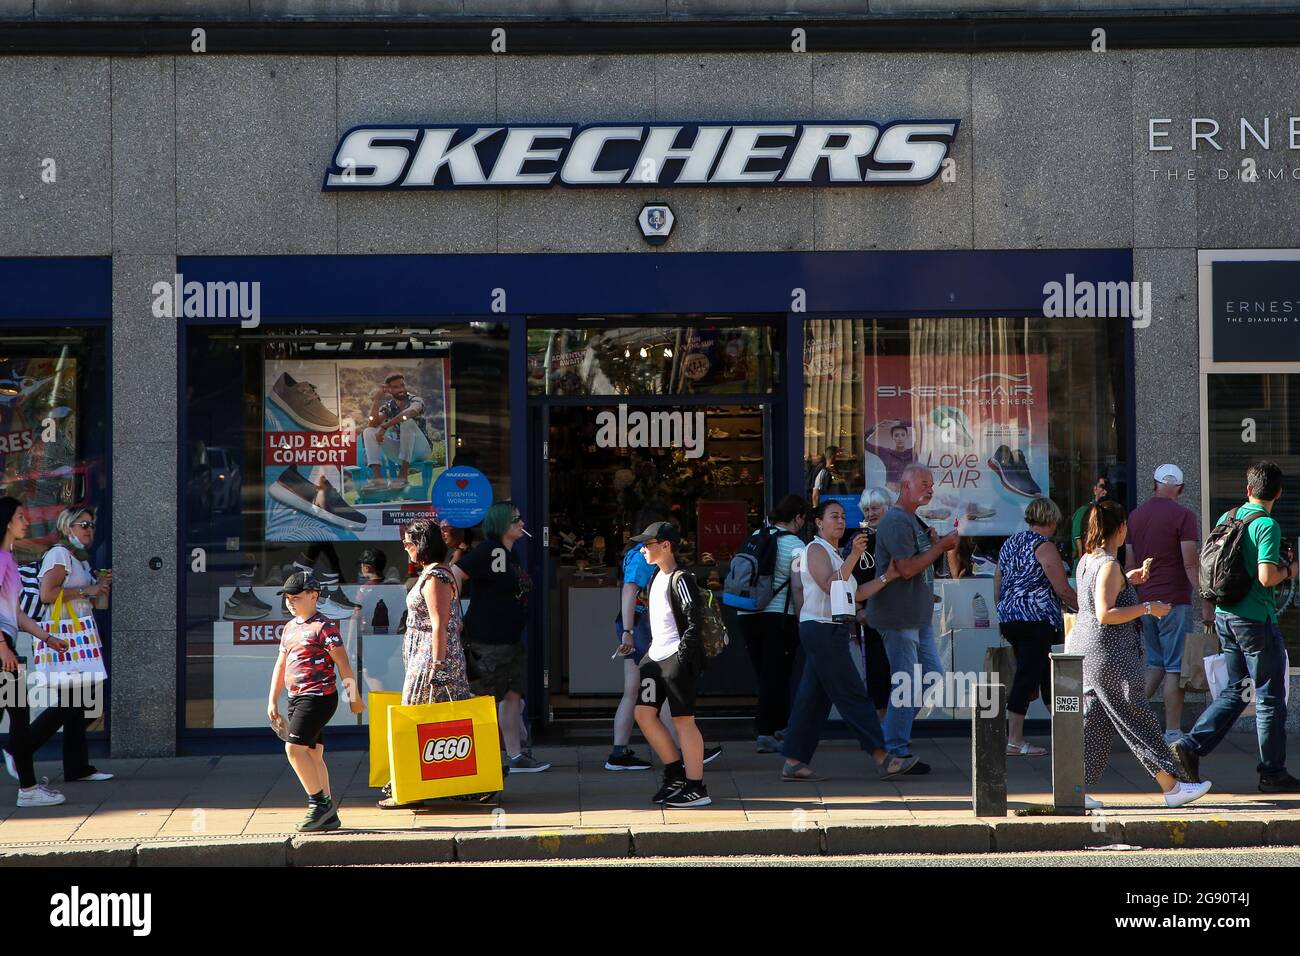 Page 3 - Skechers High Resolution Stock Photography and Images - Alamy